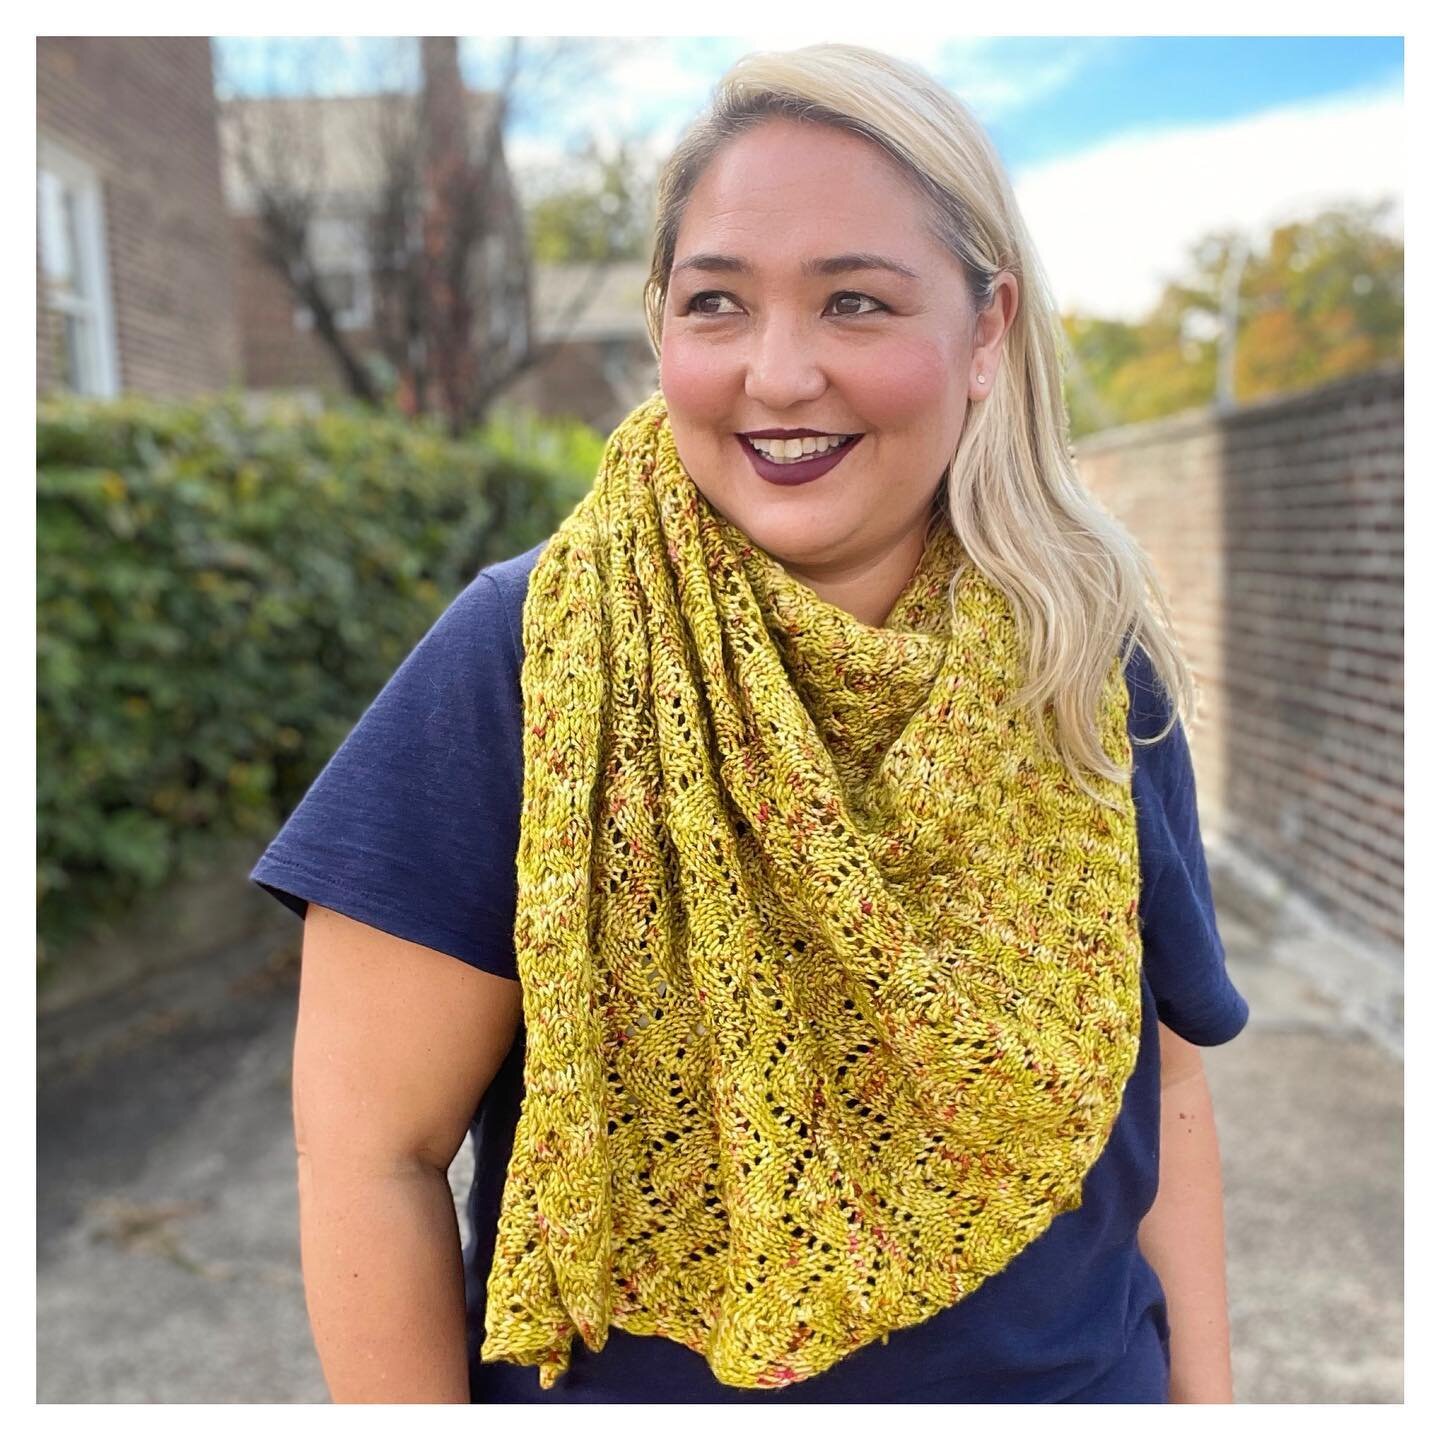 The temperature has taken a turn &amp; there&rsquo;s a crispness in the air, it&rsquo;s definitely shawl season! I&rsquo;m wearing @dreareneeknits #honeymossshawl in colorway Falling Leaves on Swift Cozy DK on this beautiful autumn day. I loved the m